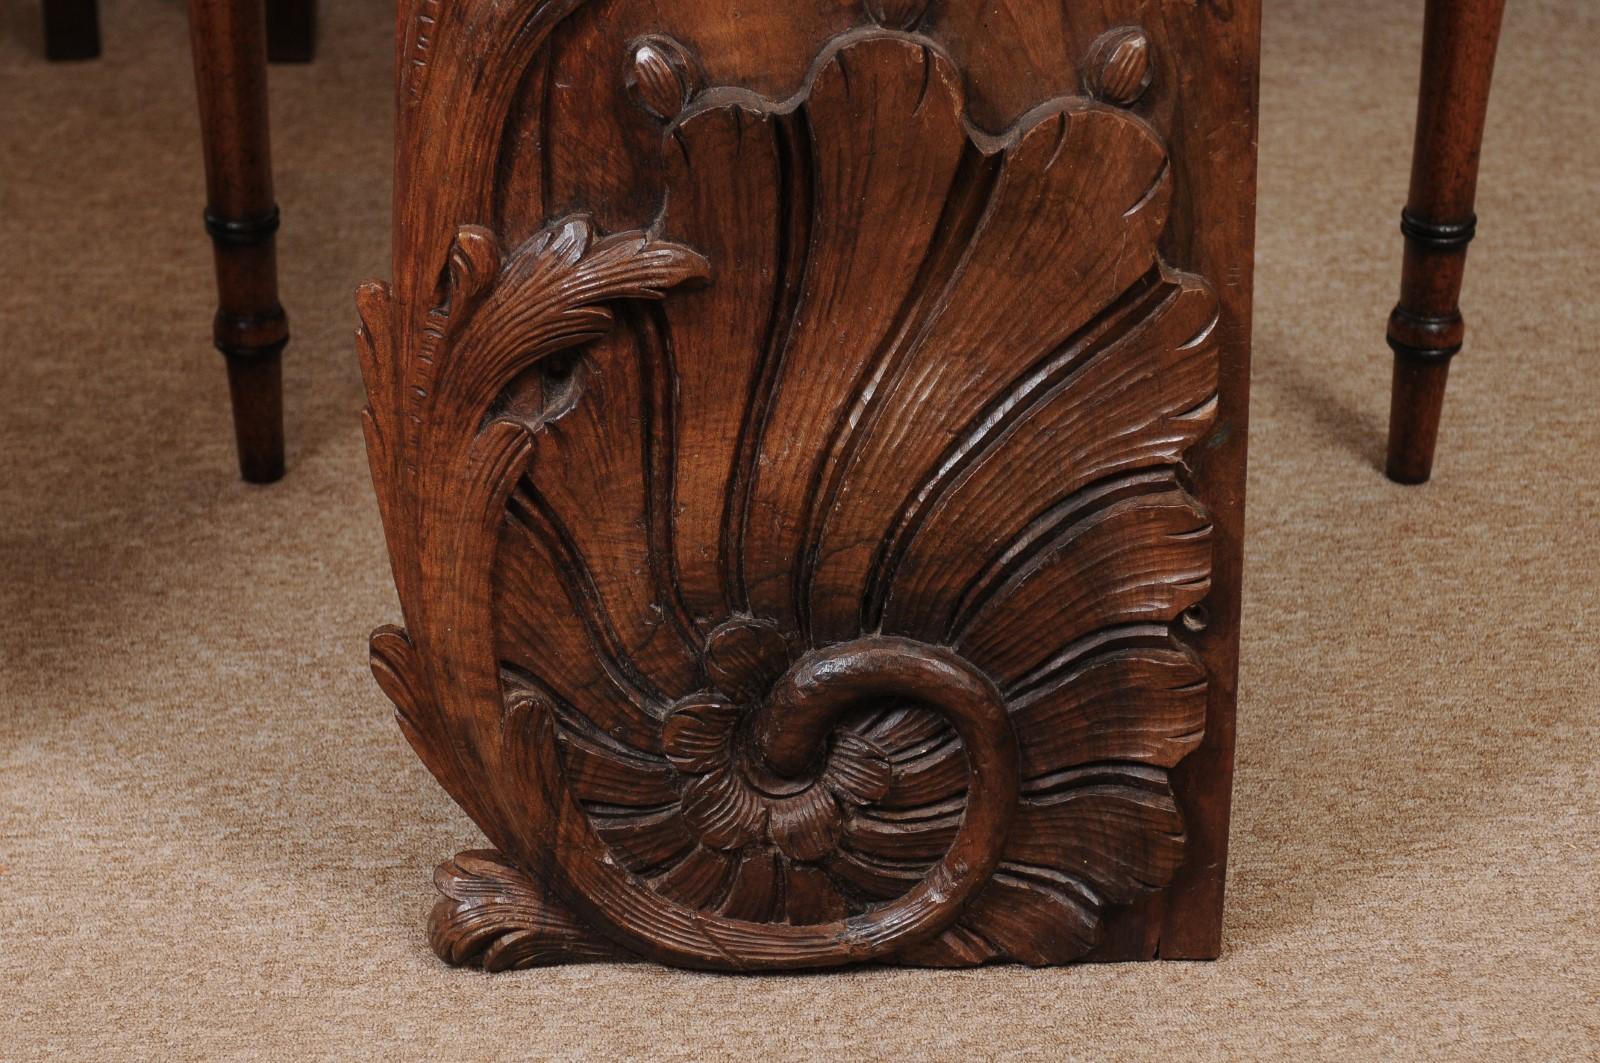 Pair of Acanthus Leaf Caved Walnut Architectural Elements, 18th Century For Sale 3